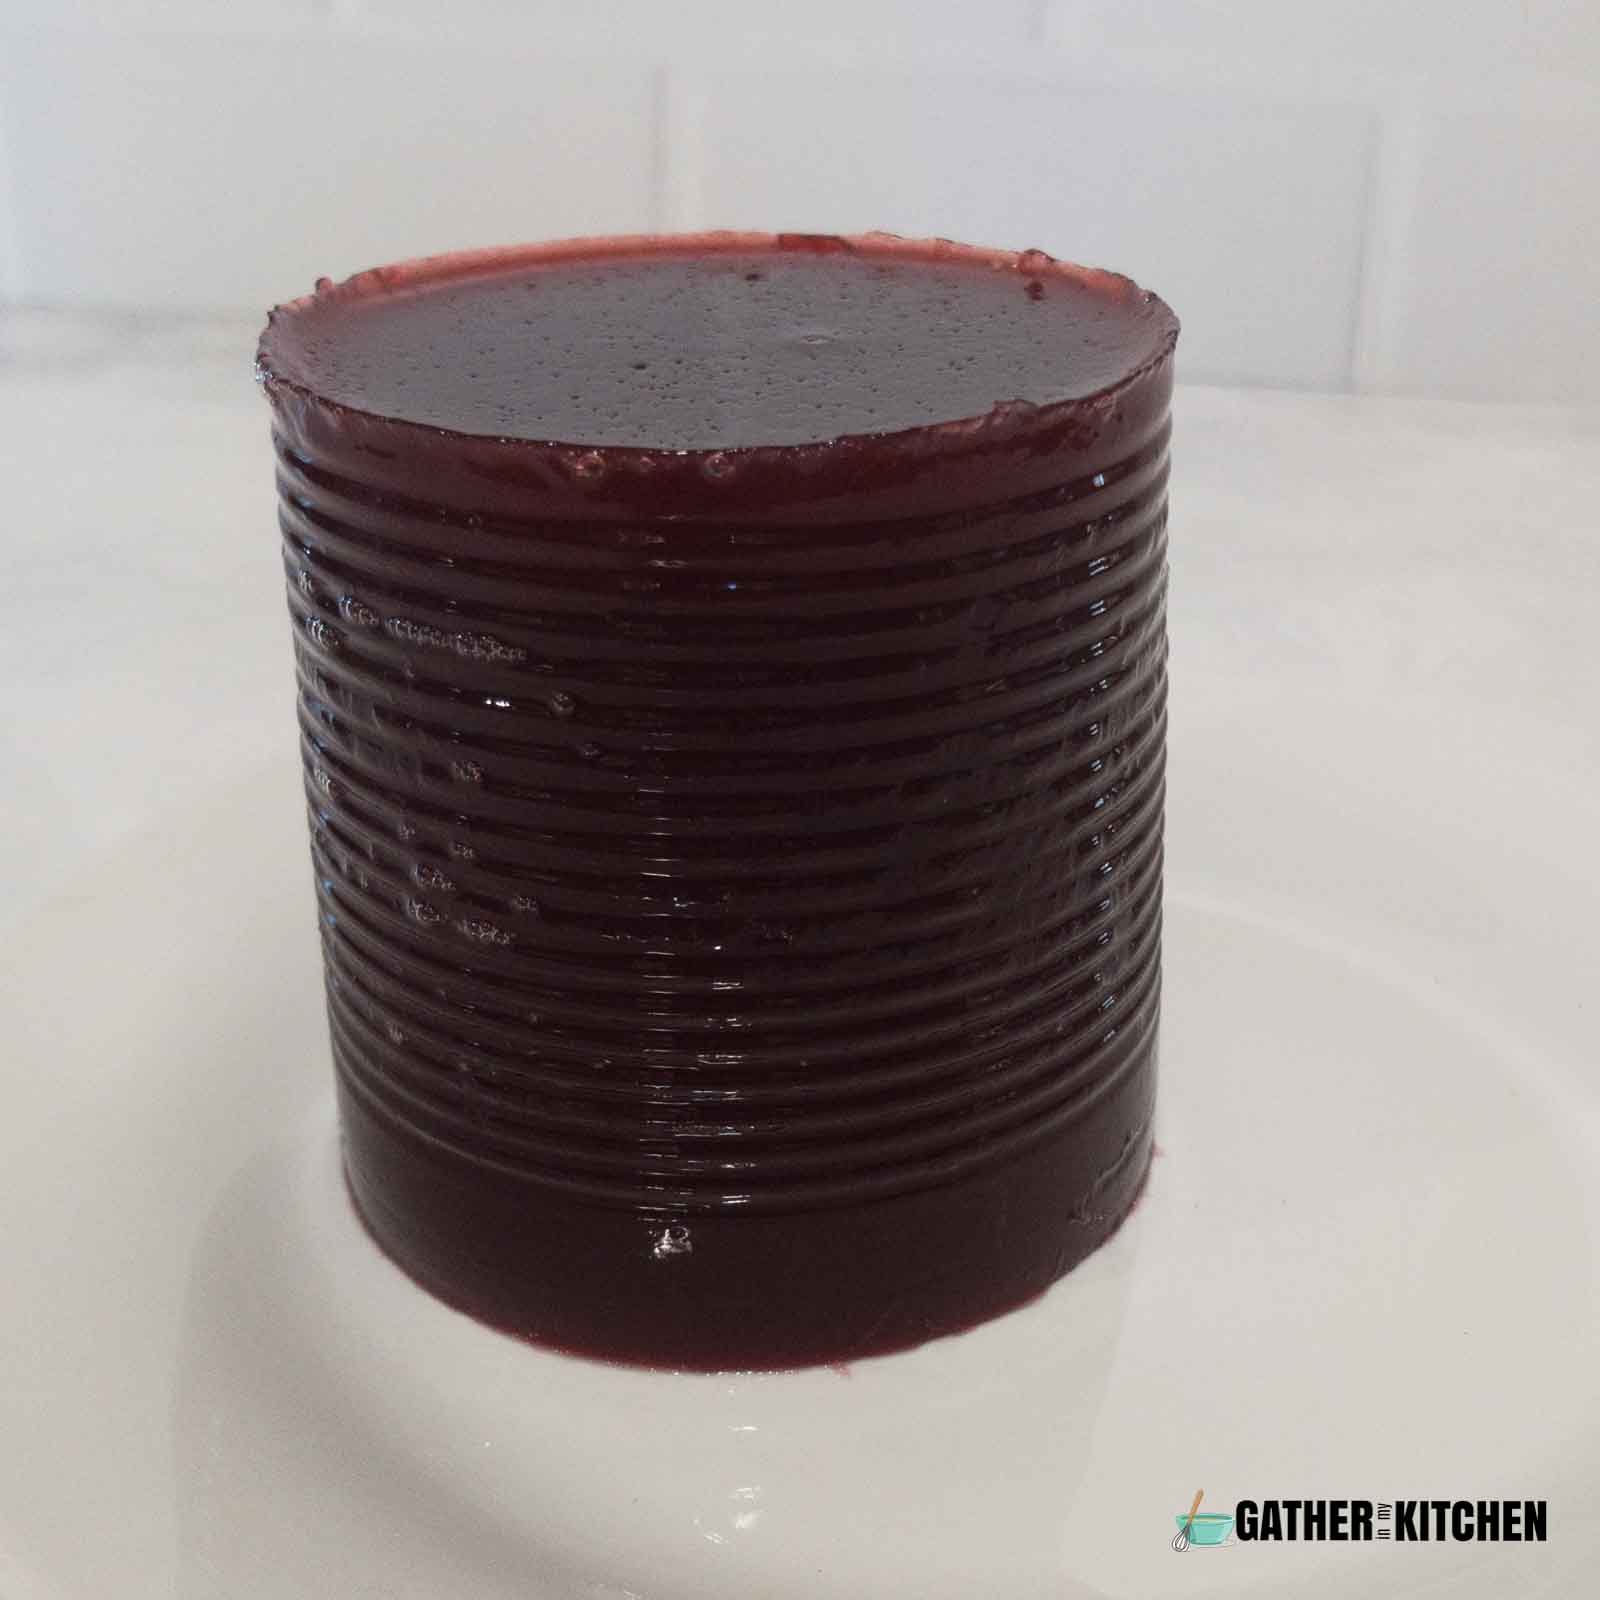 Canned cranberry sauce standing on it's side.